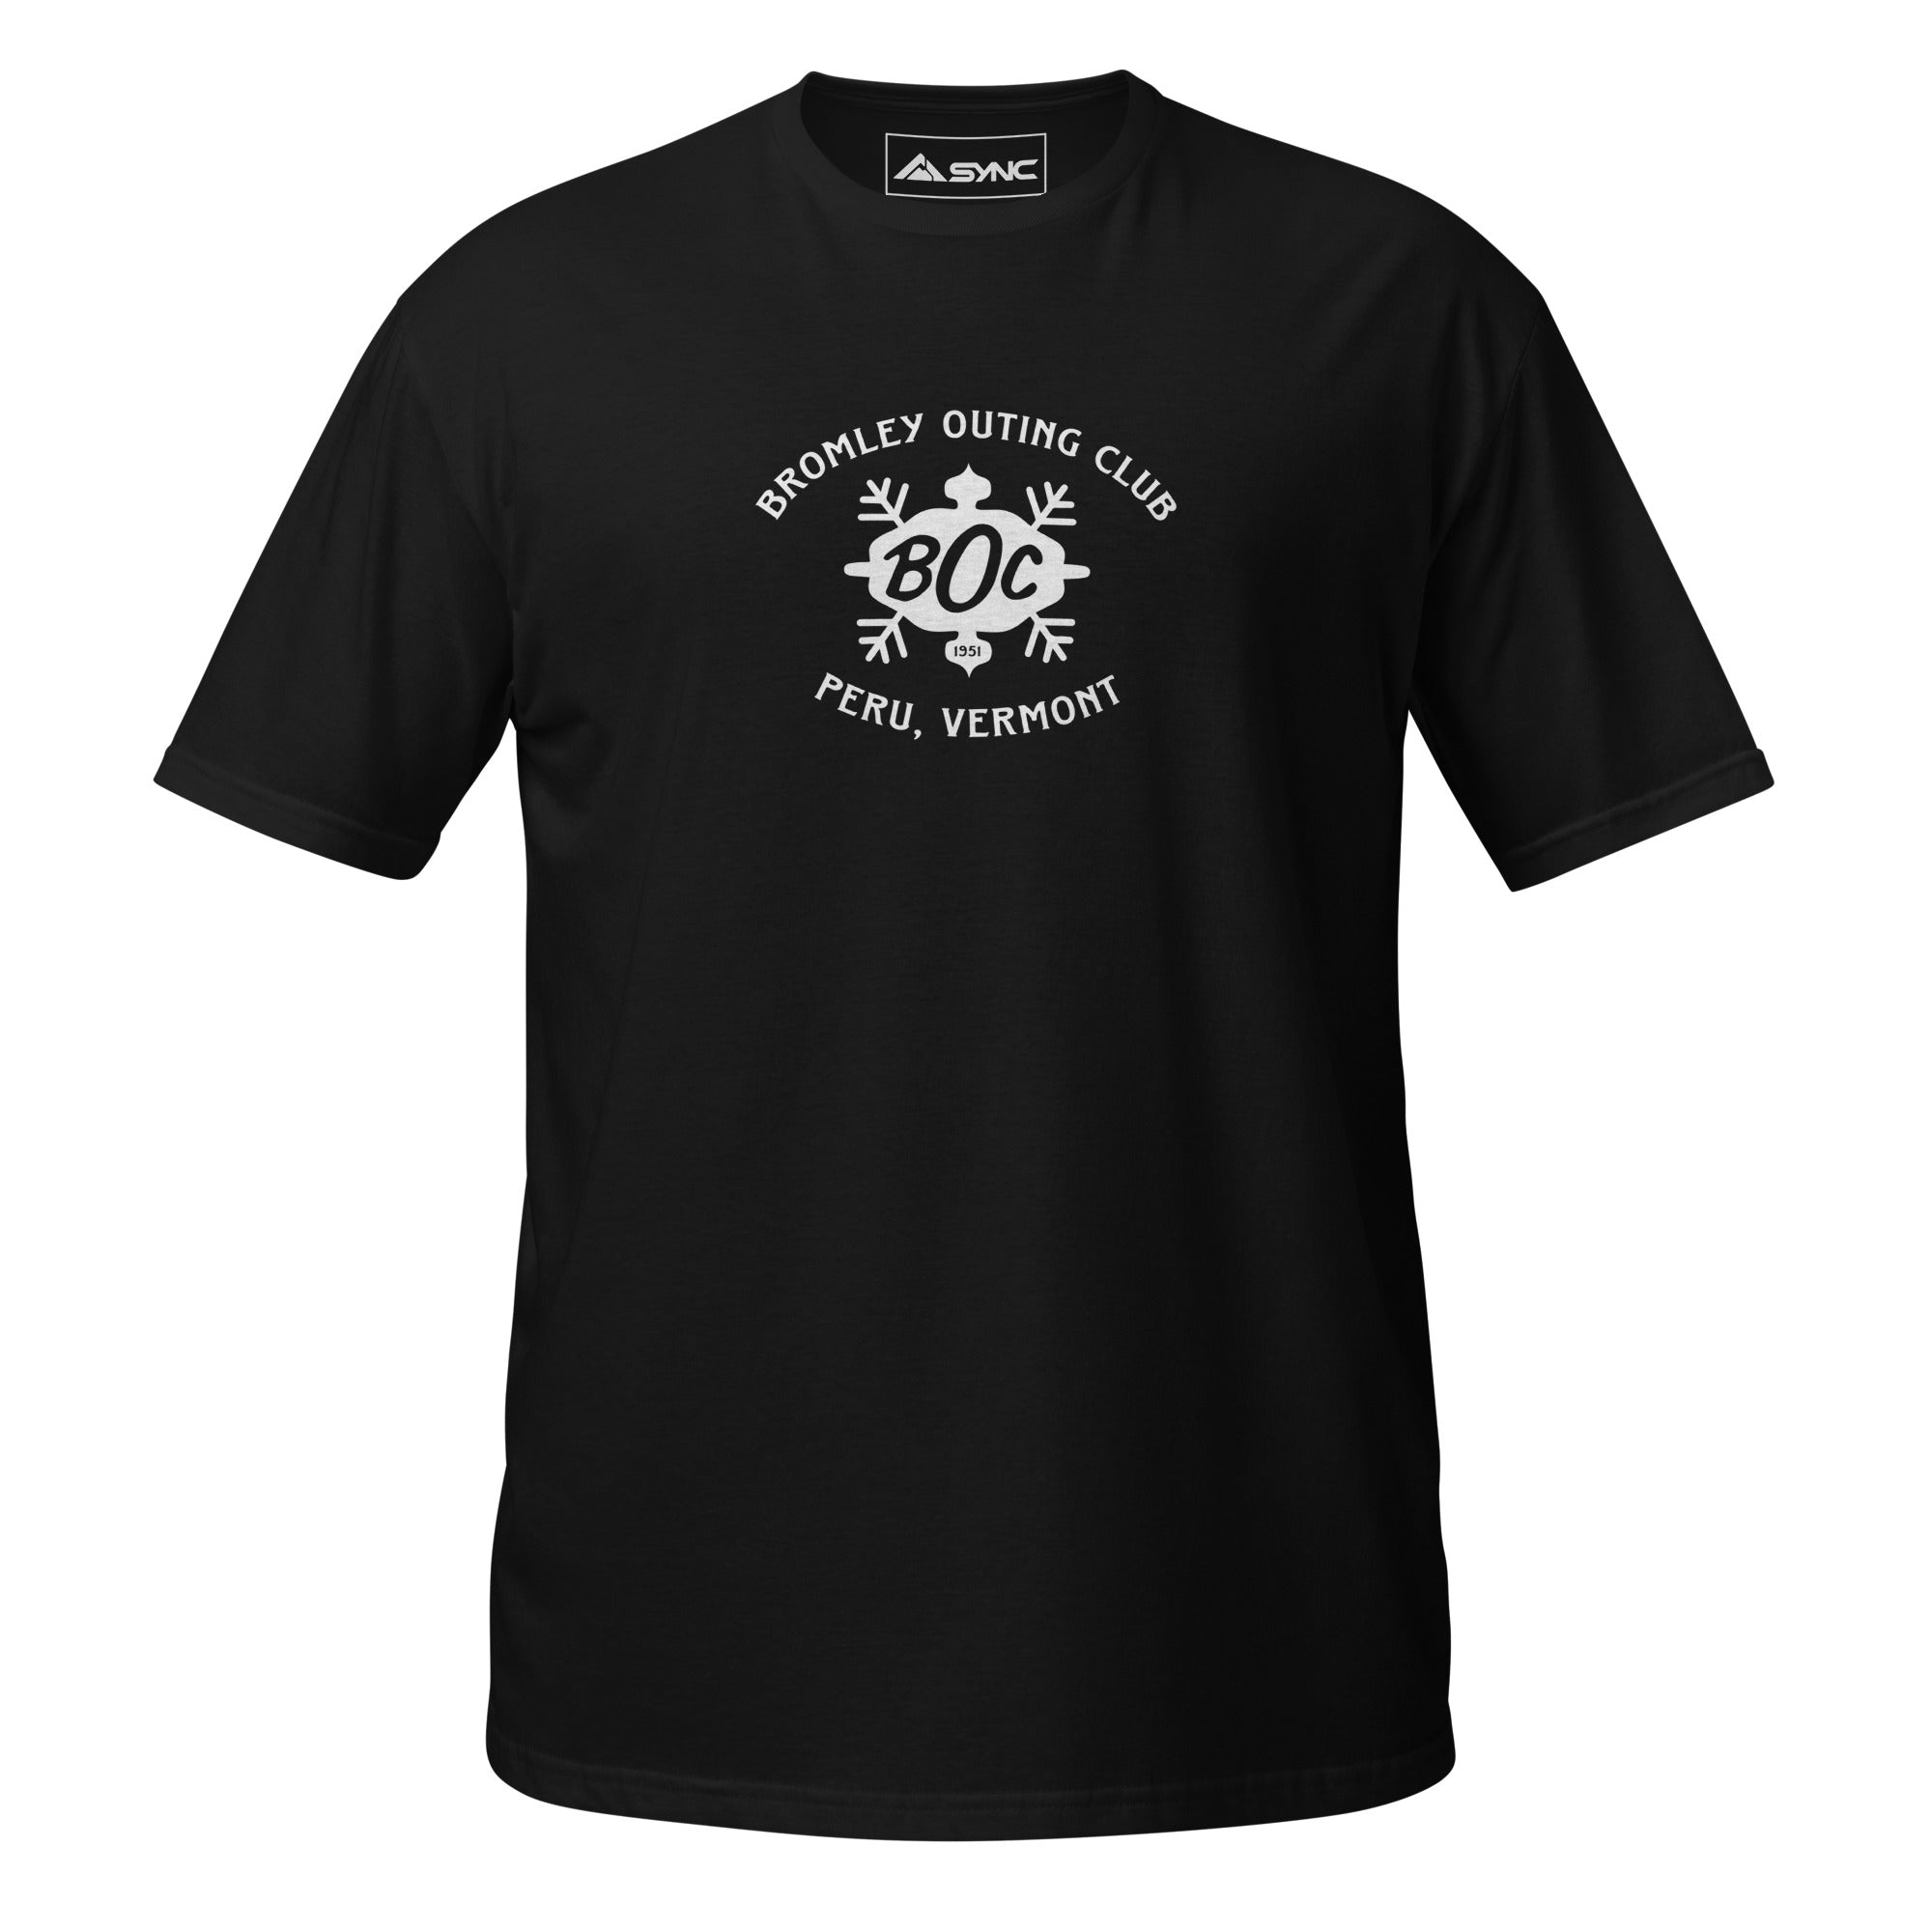 Adult Cotton T-Shirt - Bromley Outing Club